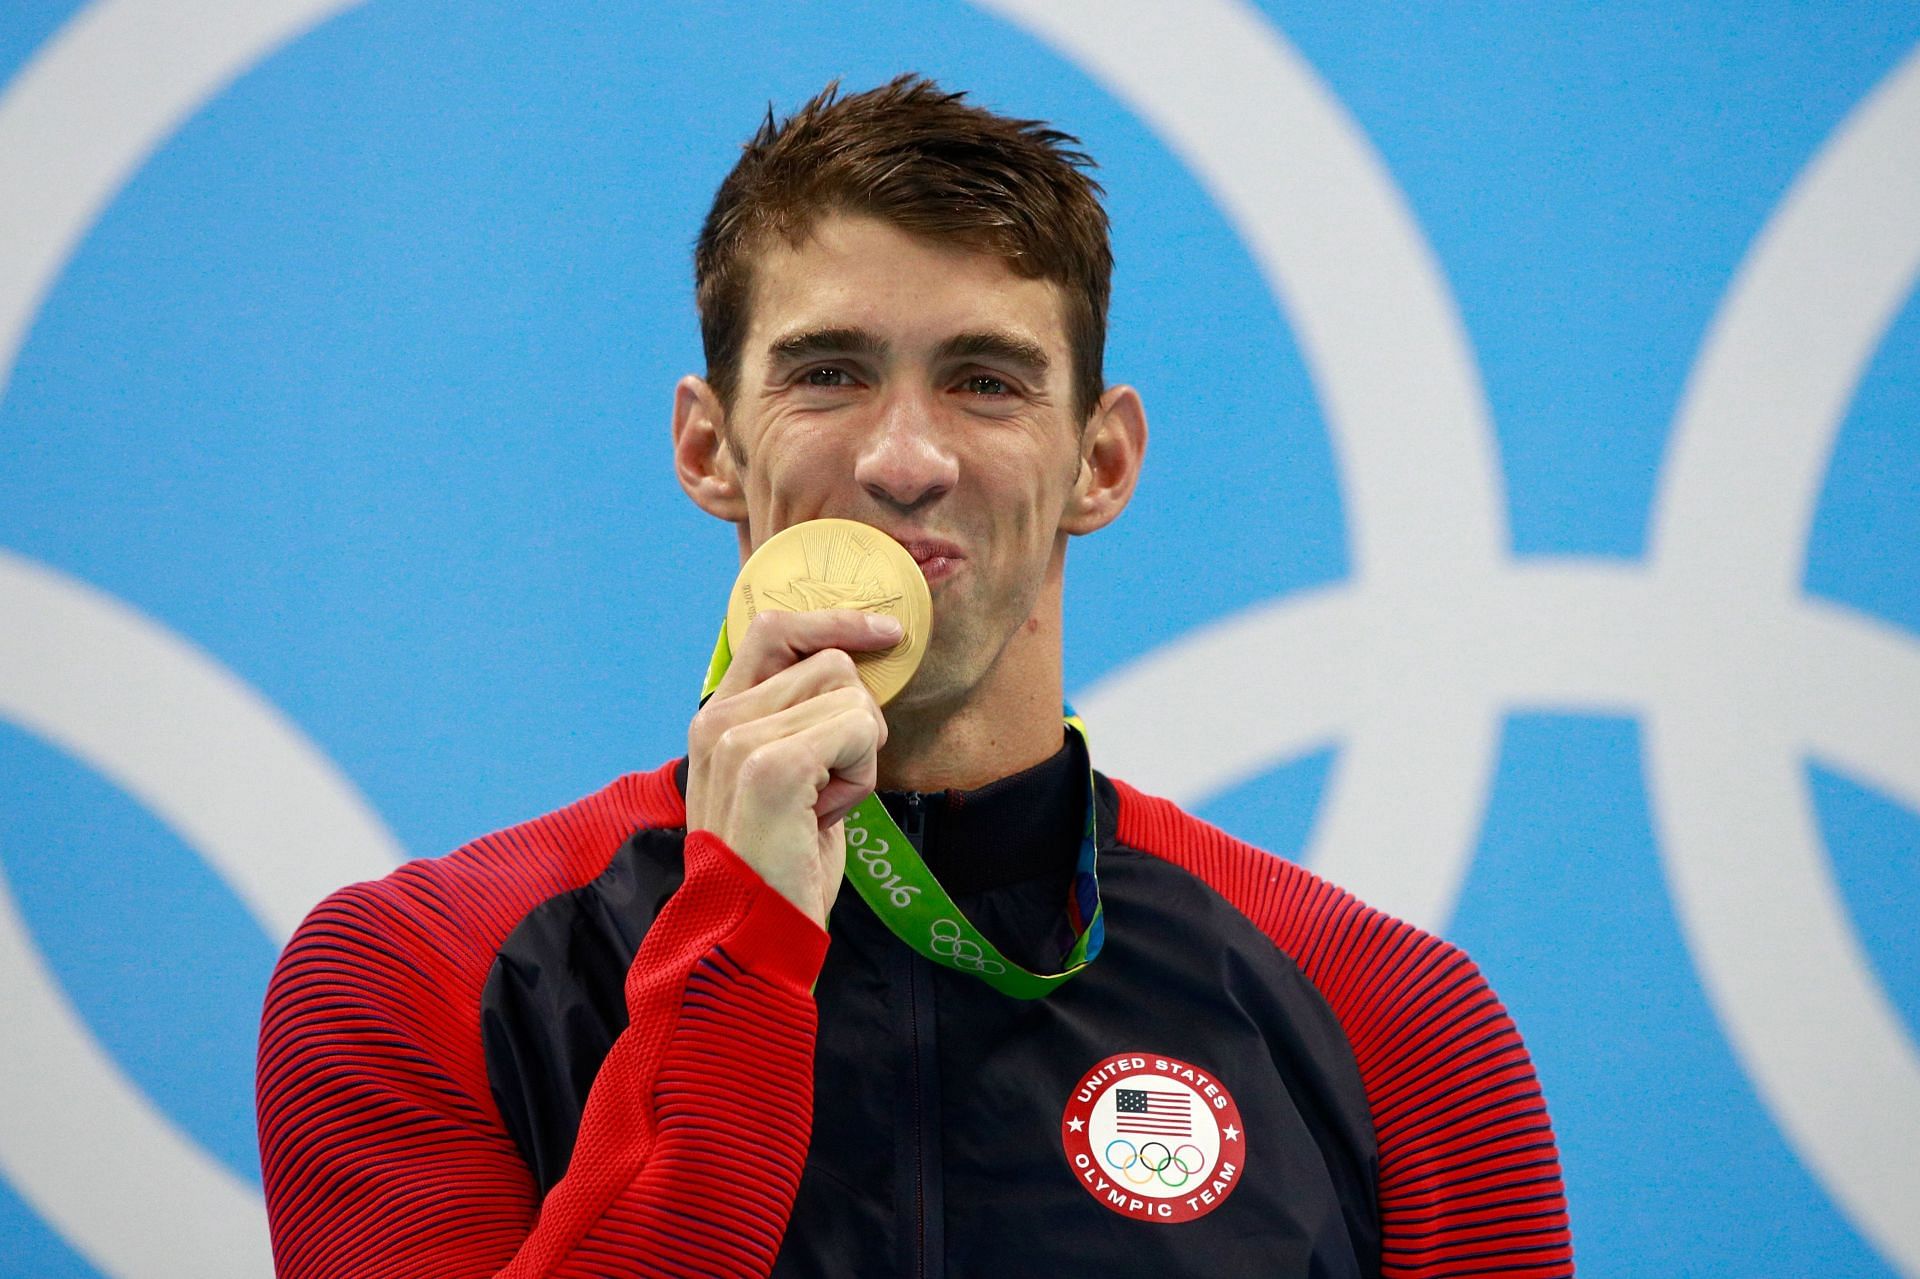 Michael Phelps at the 2016 Olympics (Image via Adam Pretty/Getty Images)